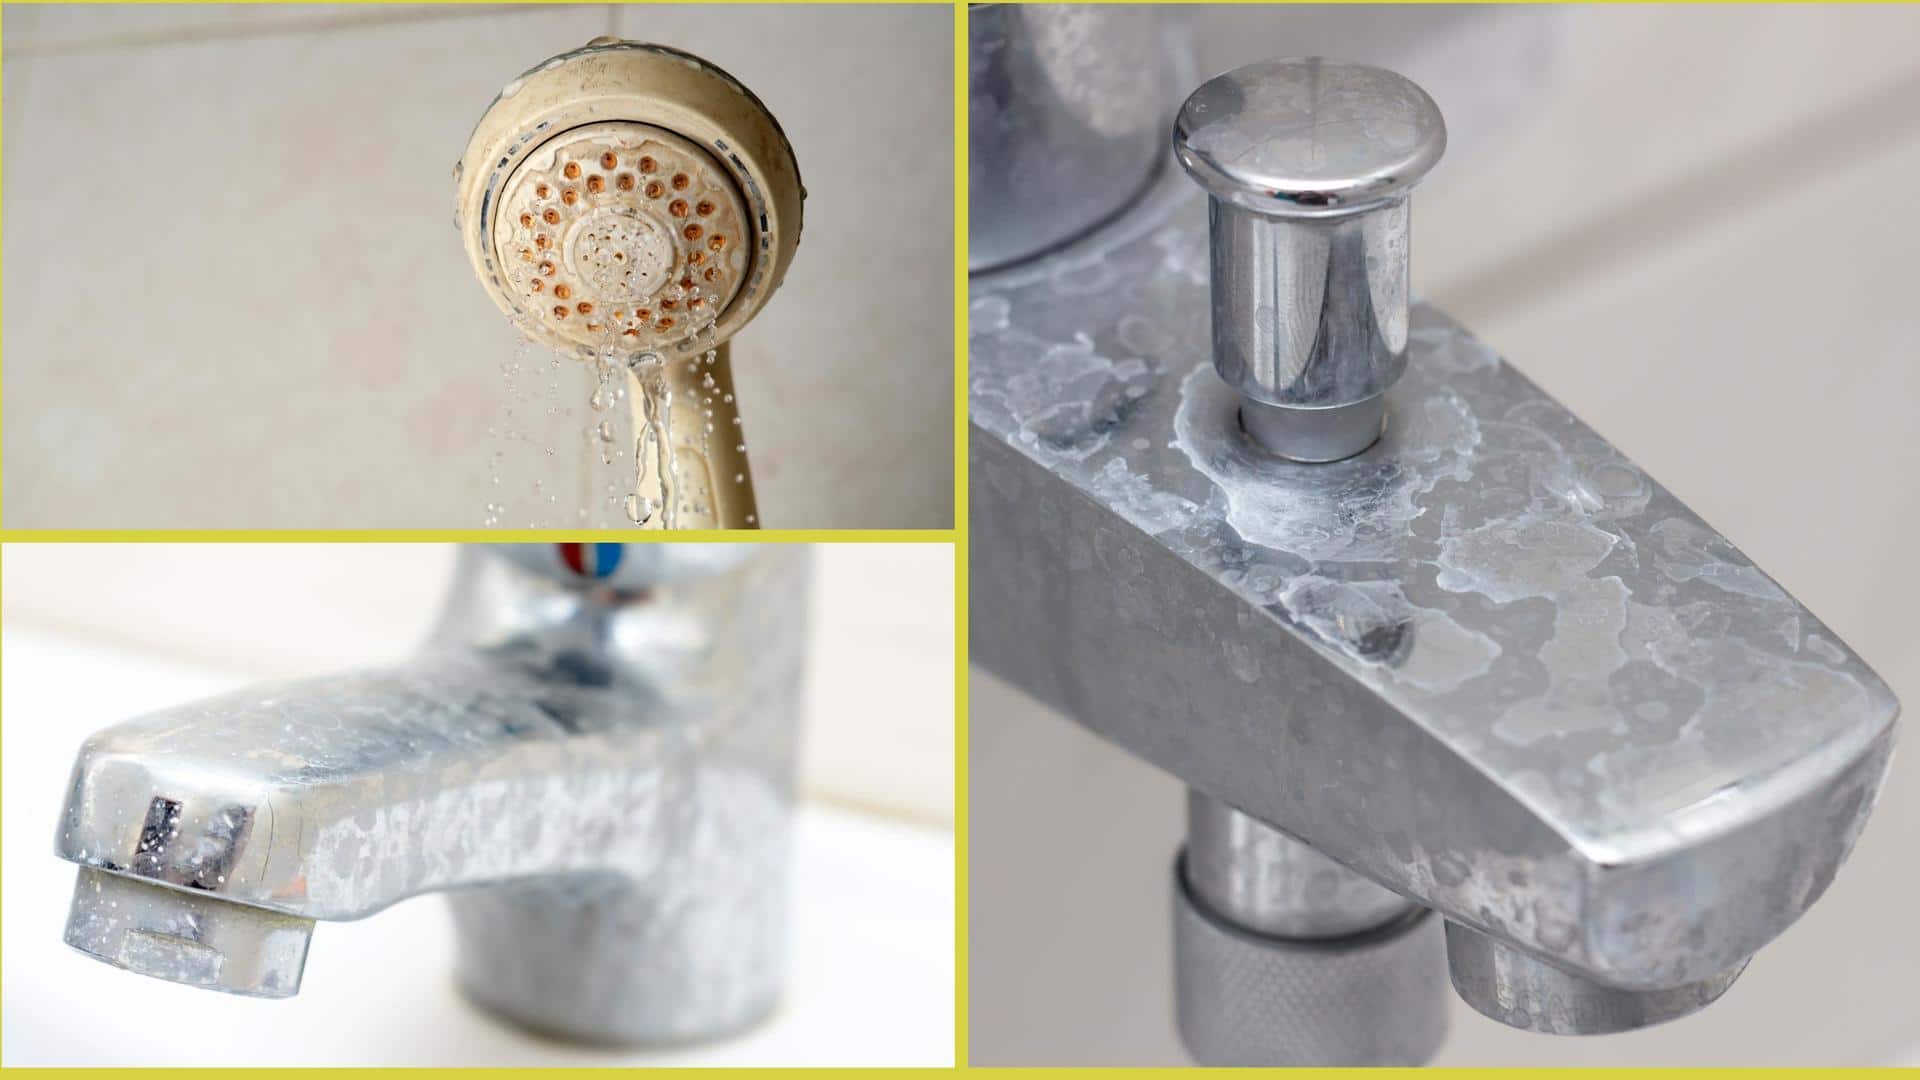 Simple hacks to remove hard water stains on fixtures